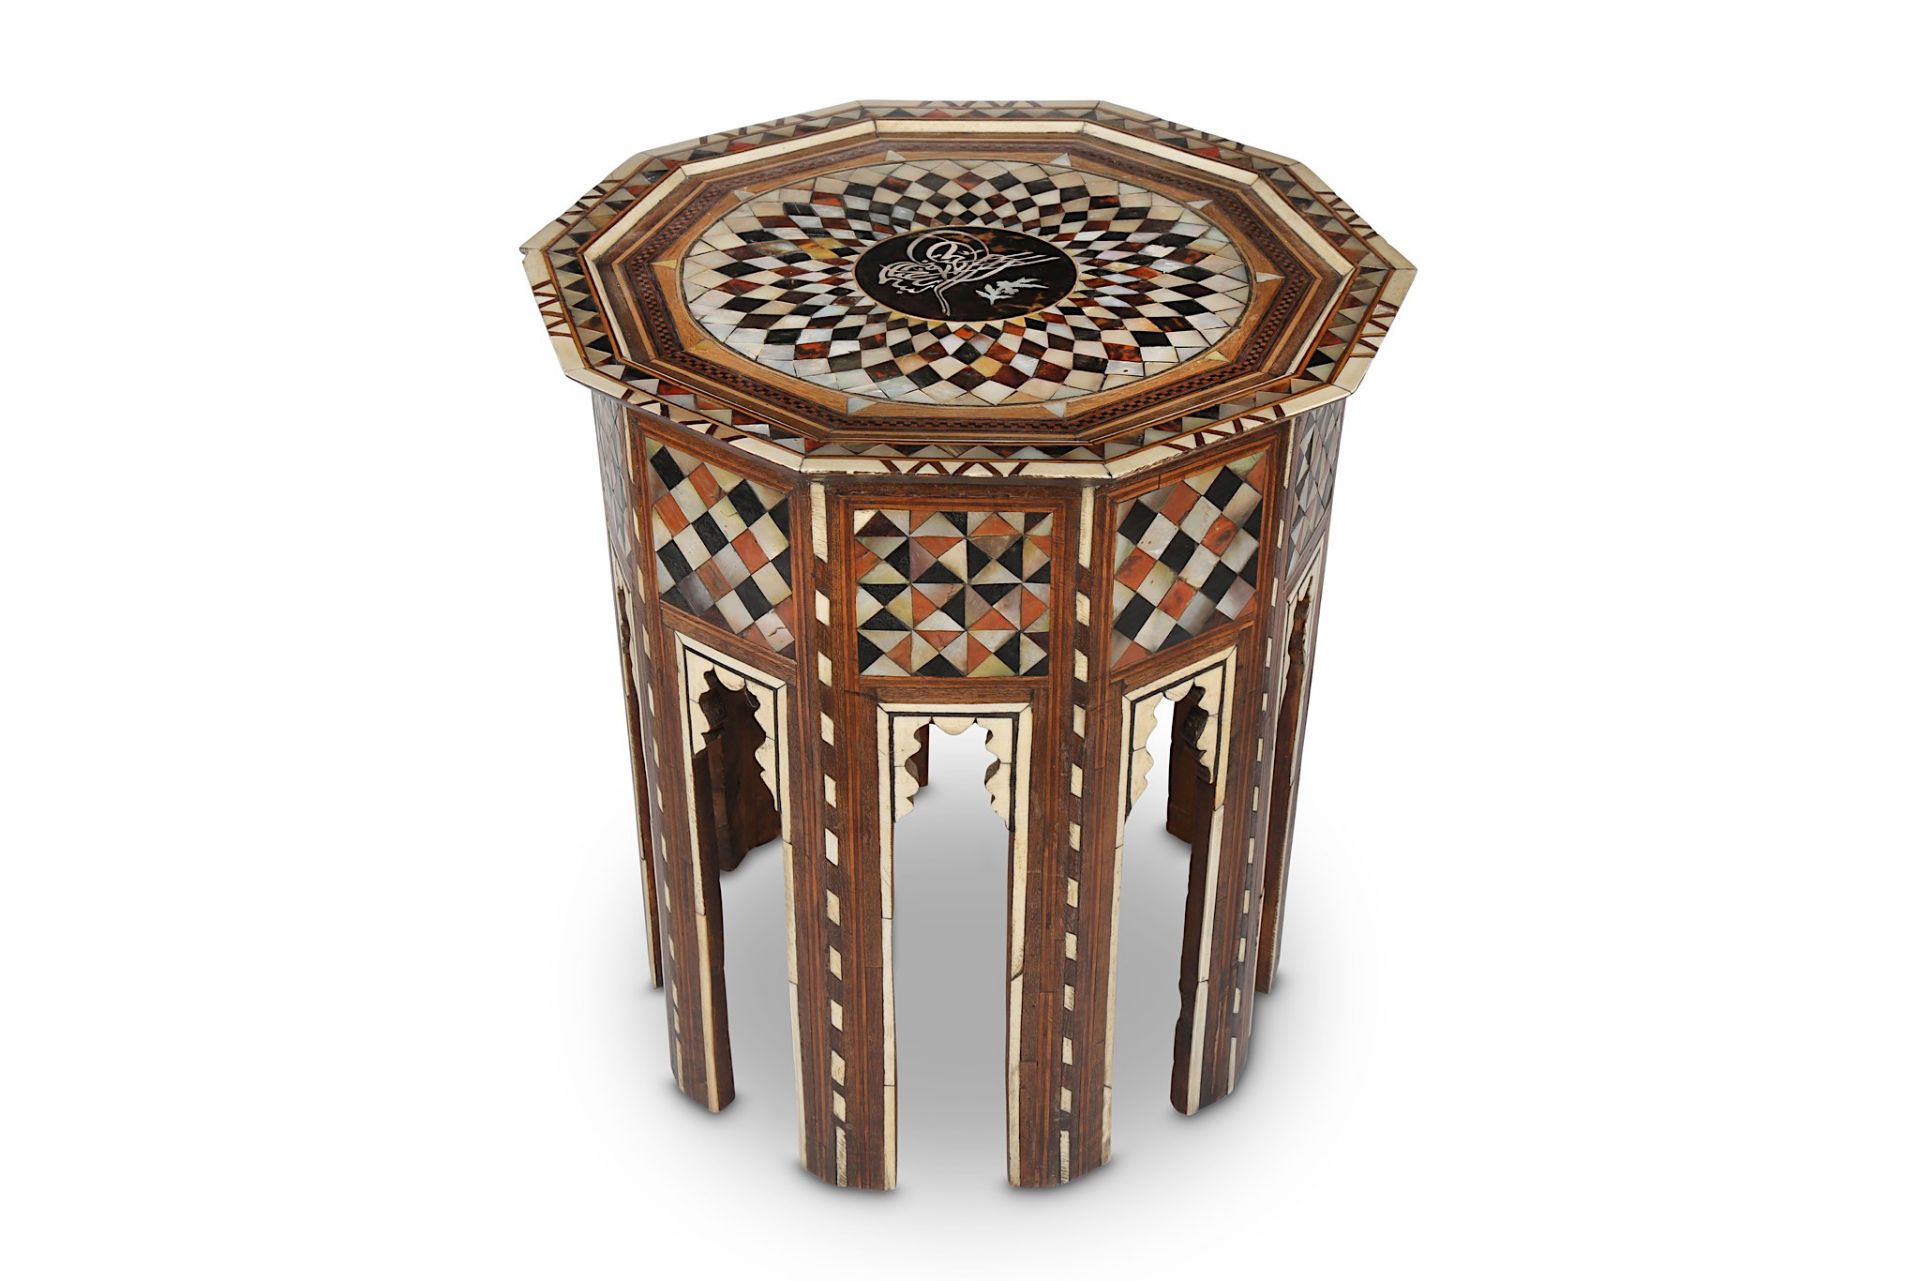 AN OTTOMAN HARDWOOD AND MOTHER-OF-PEARL-INLAID OCC